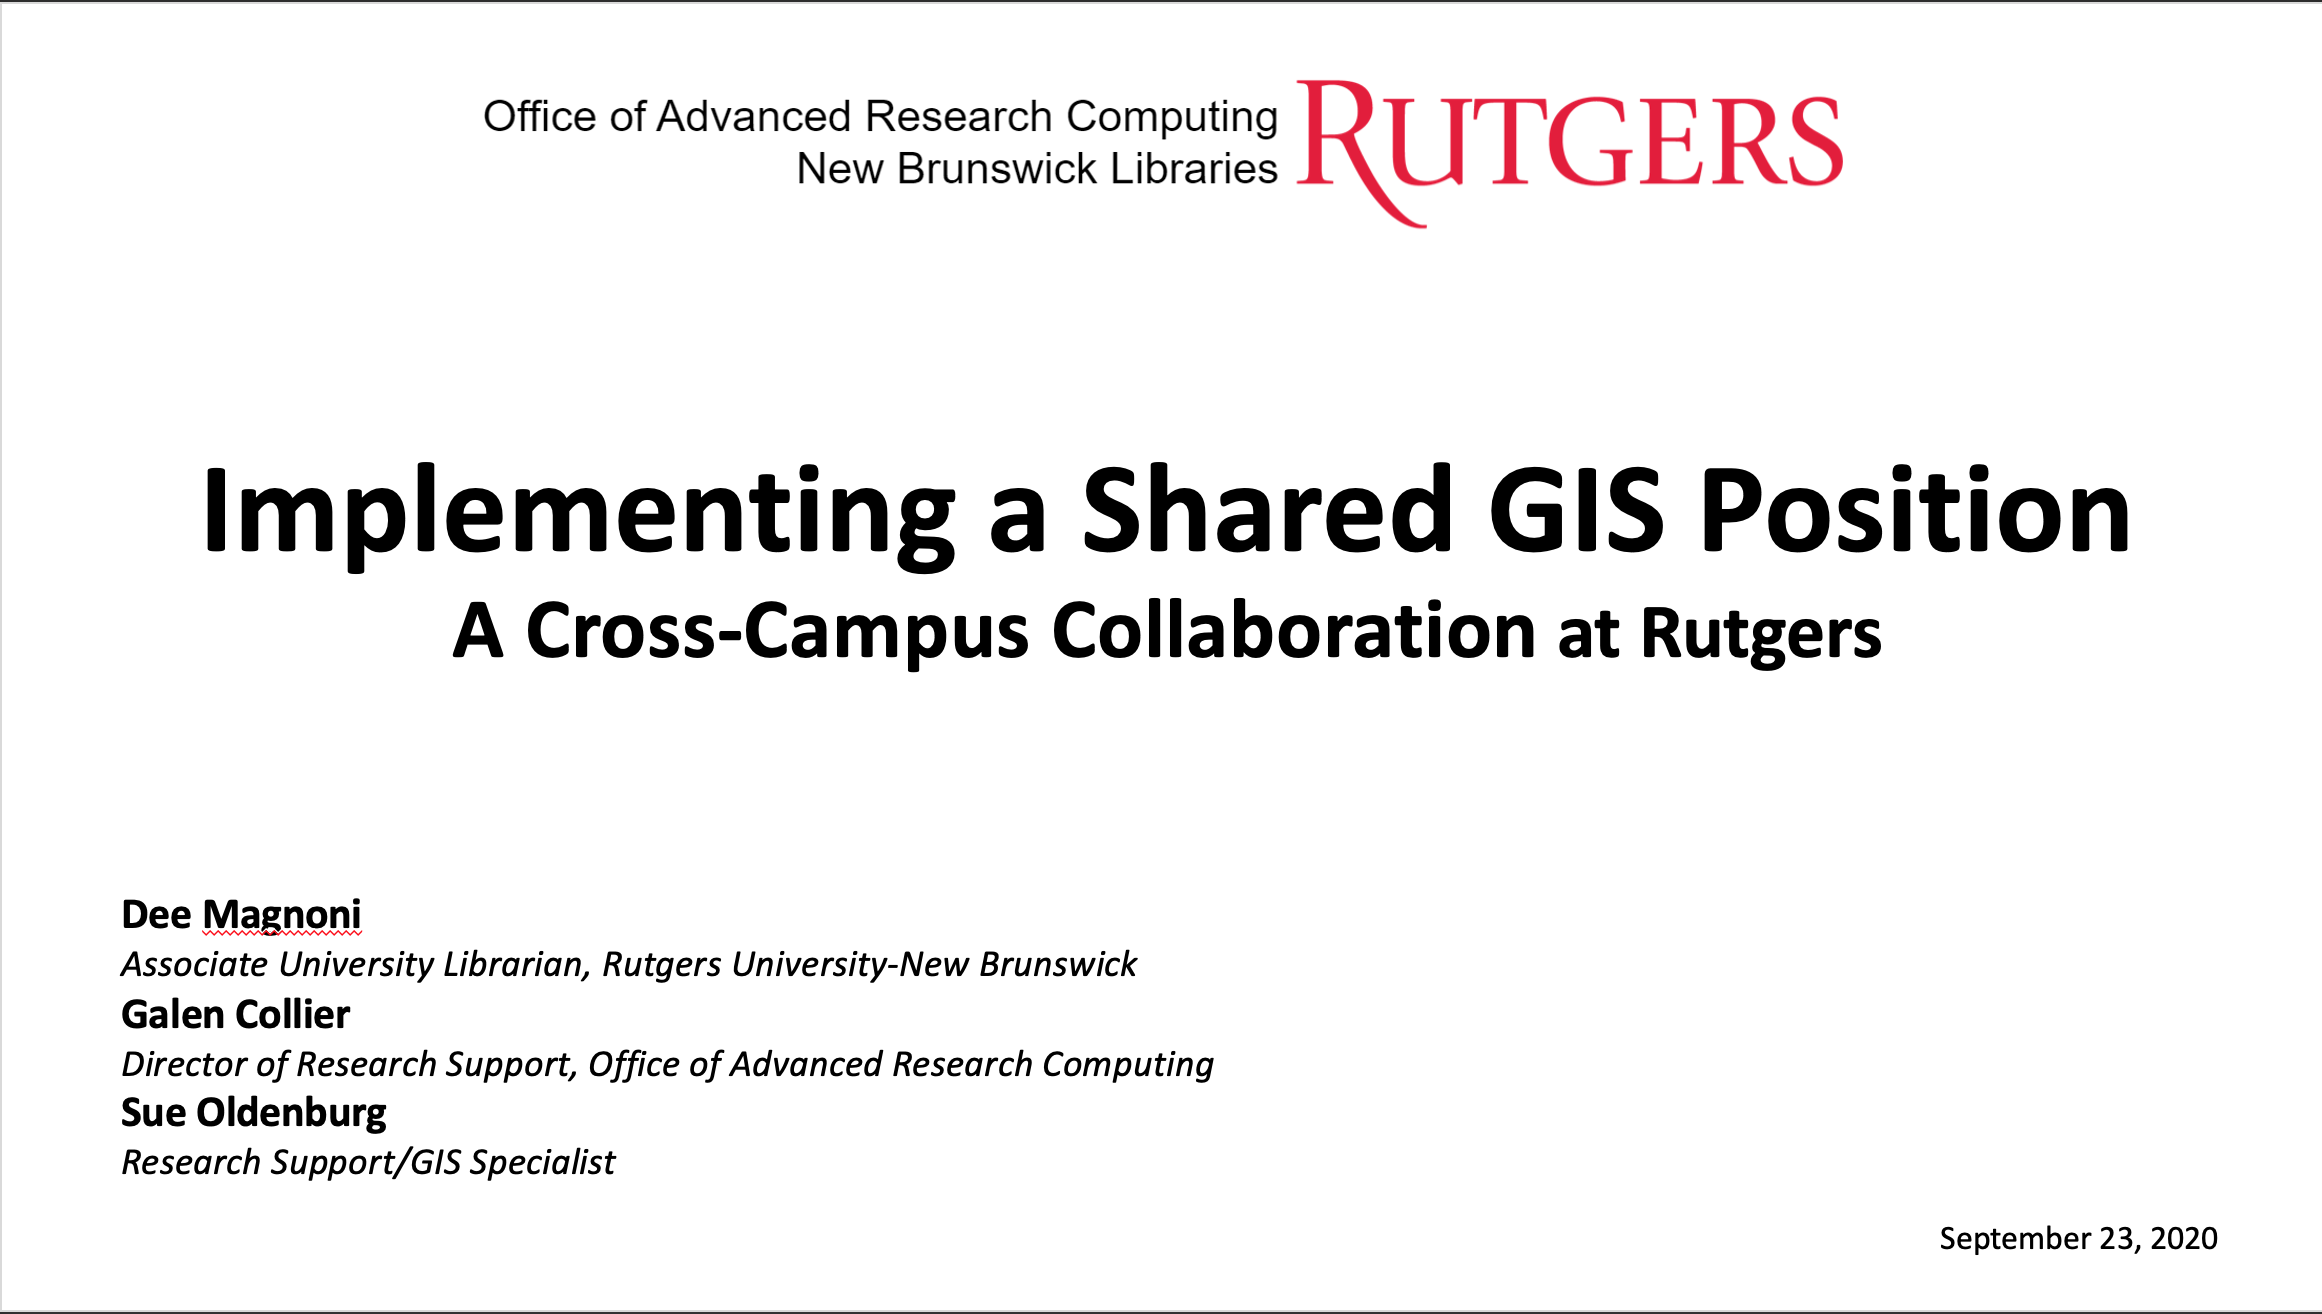 Implementing a shared GIS position at Rutgers University through cross-campus collaboration